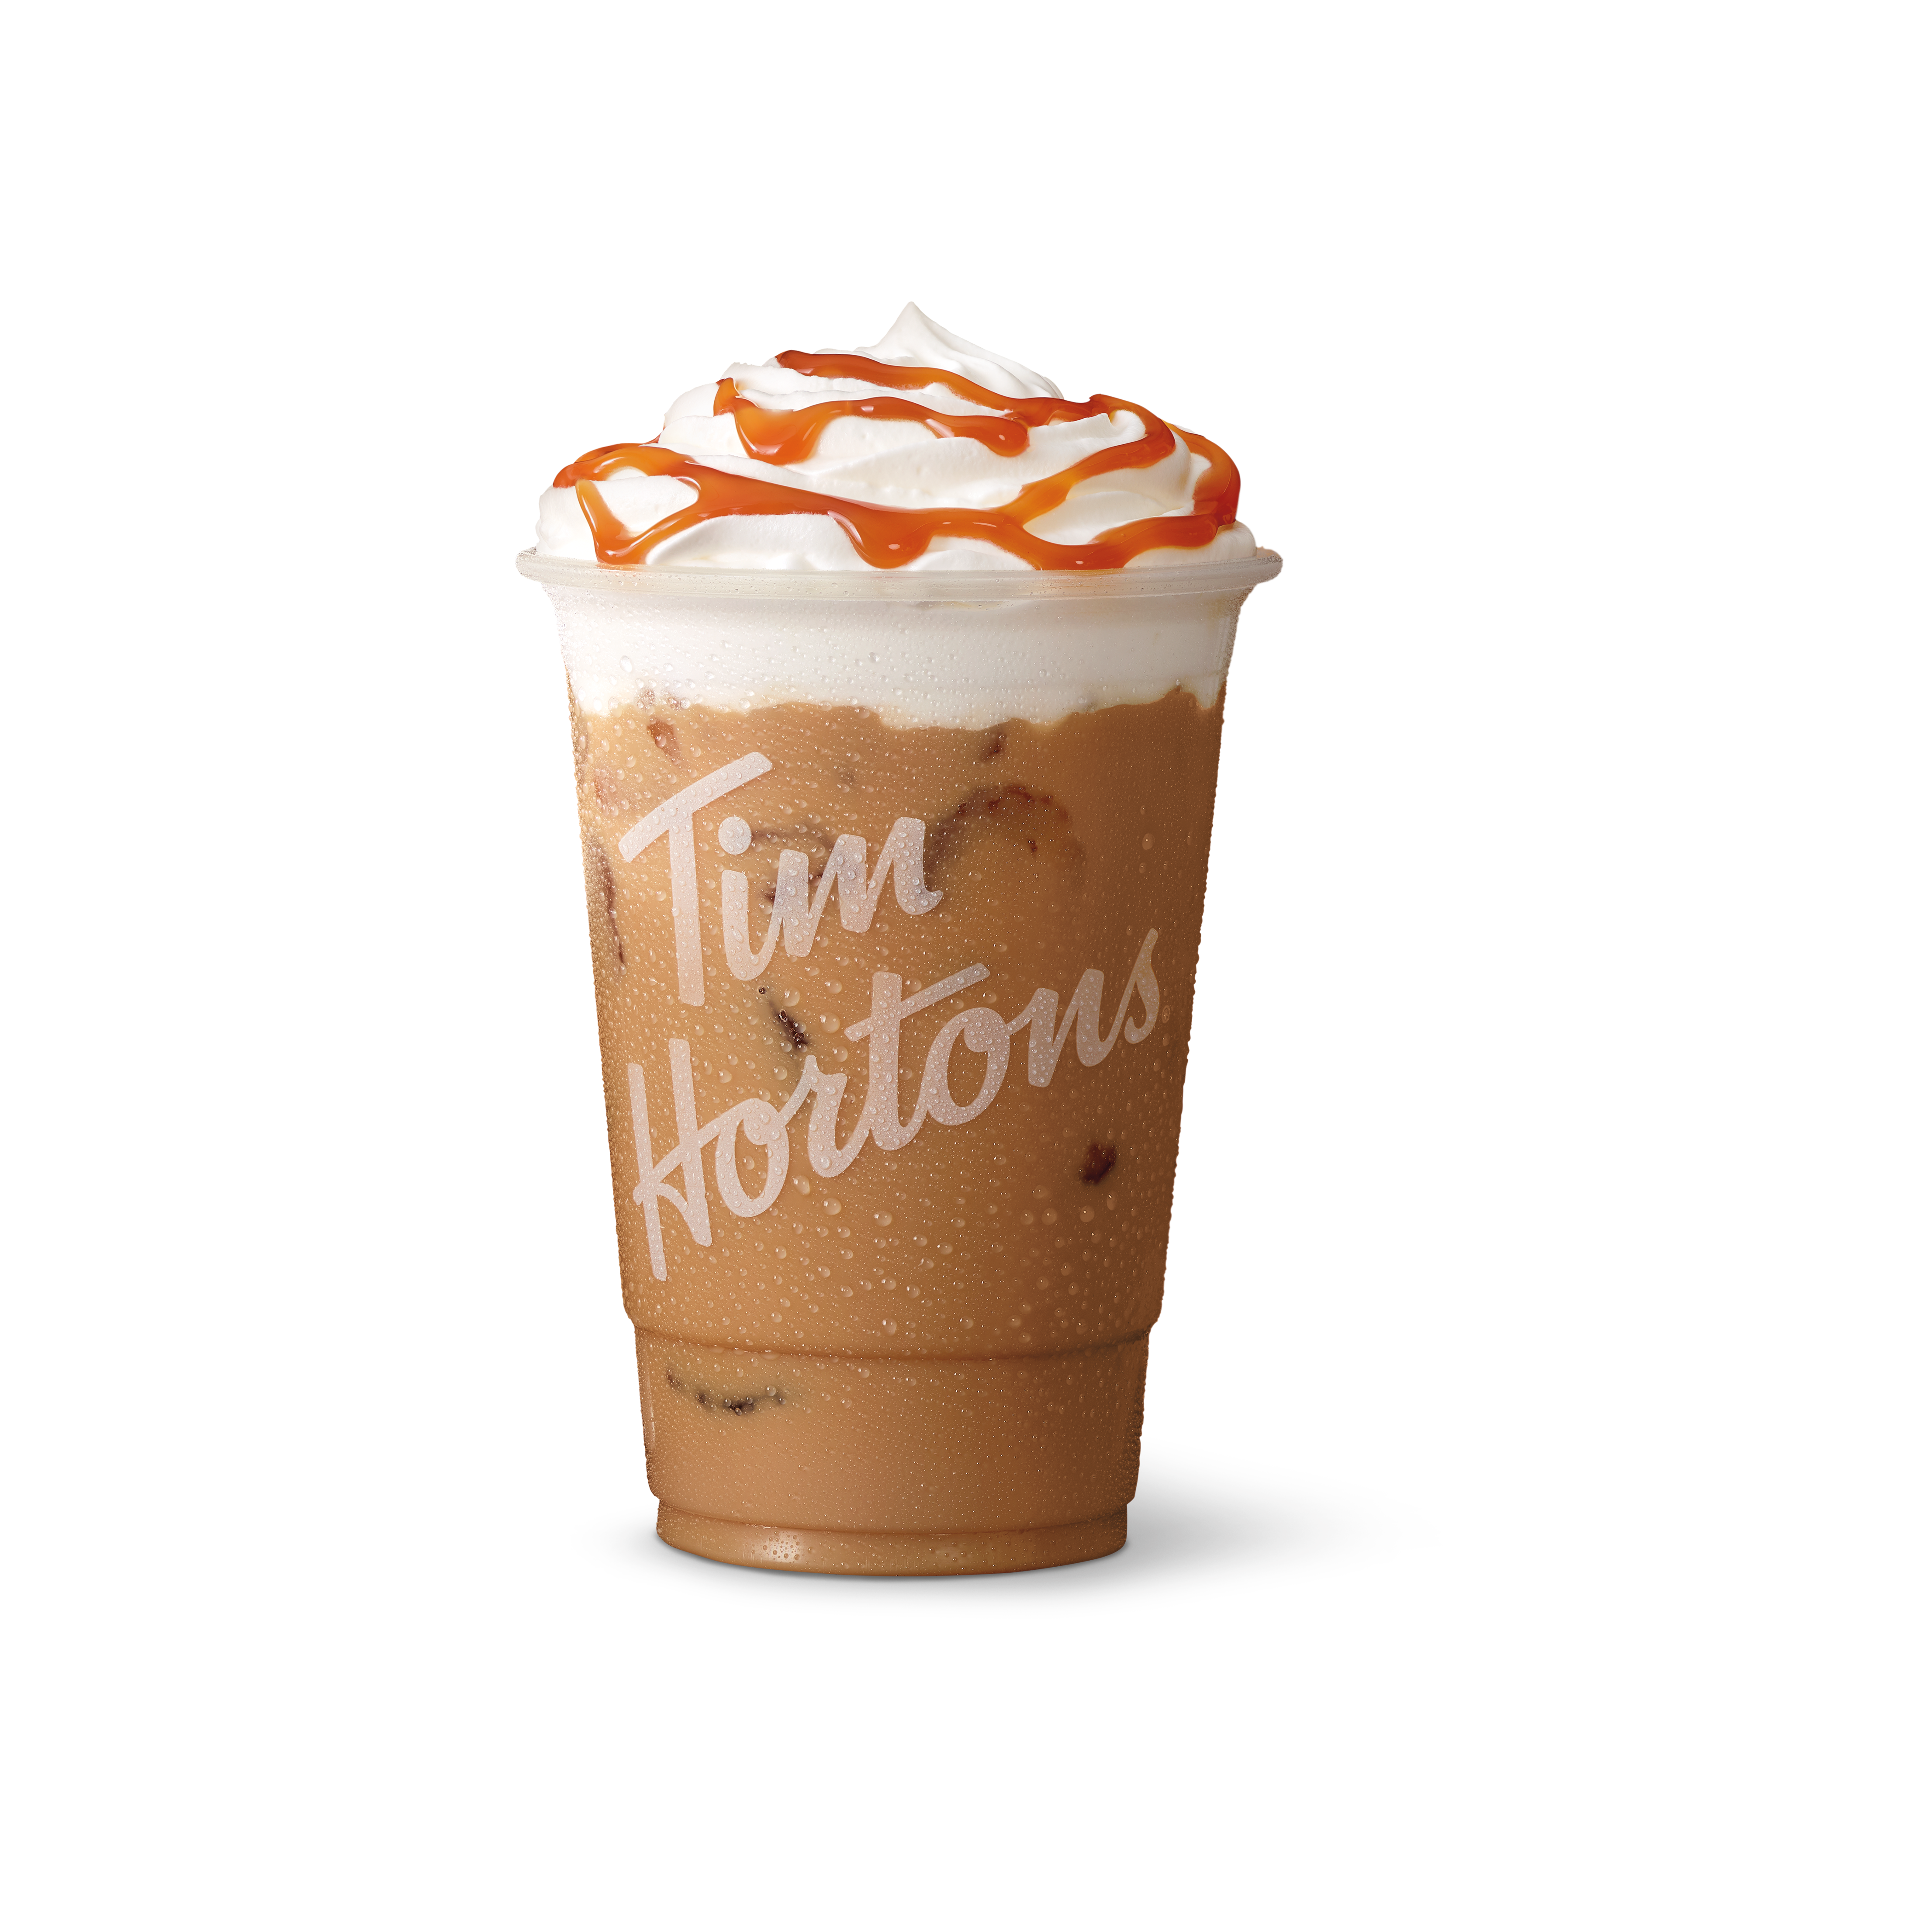 Tim Hortons Large Pumpkin Spice Iced Latte Nutrition Facts